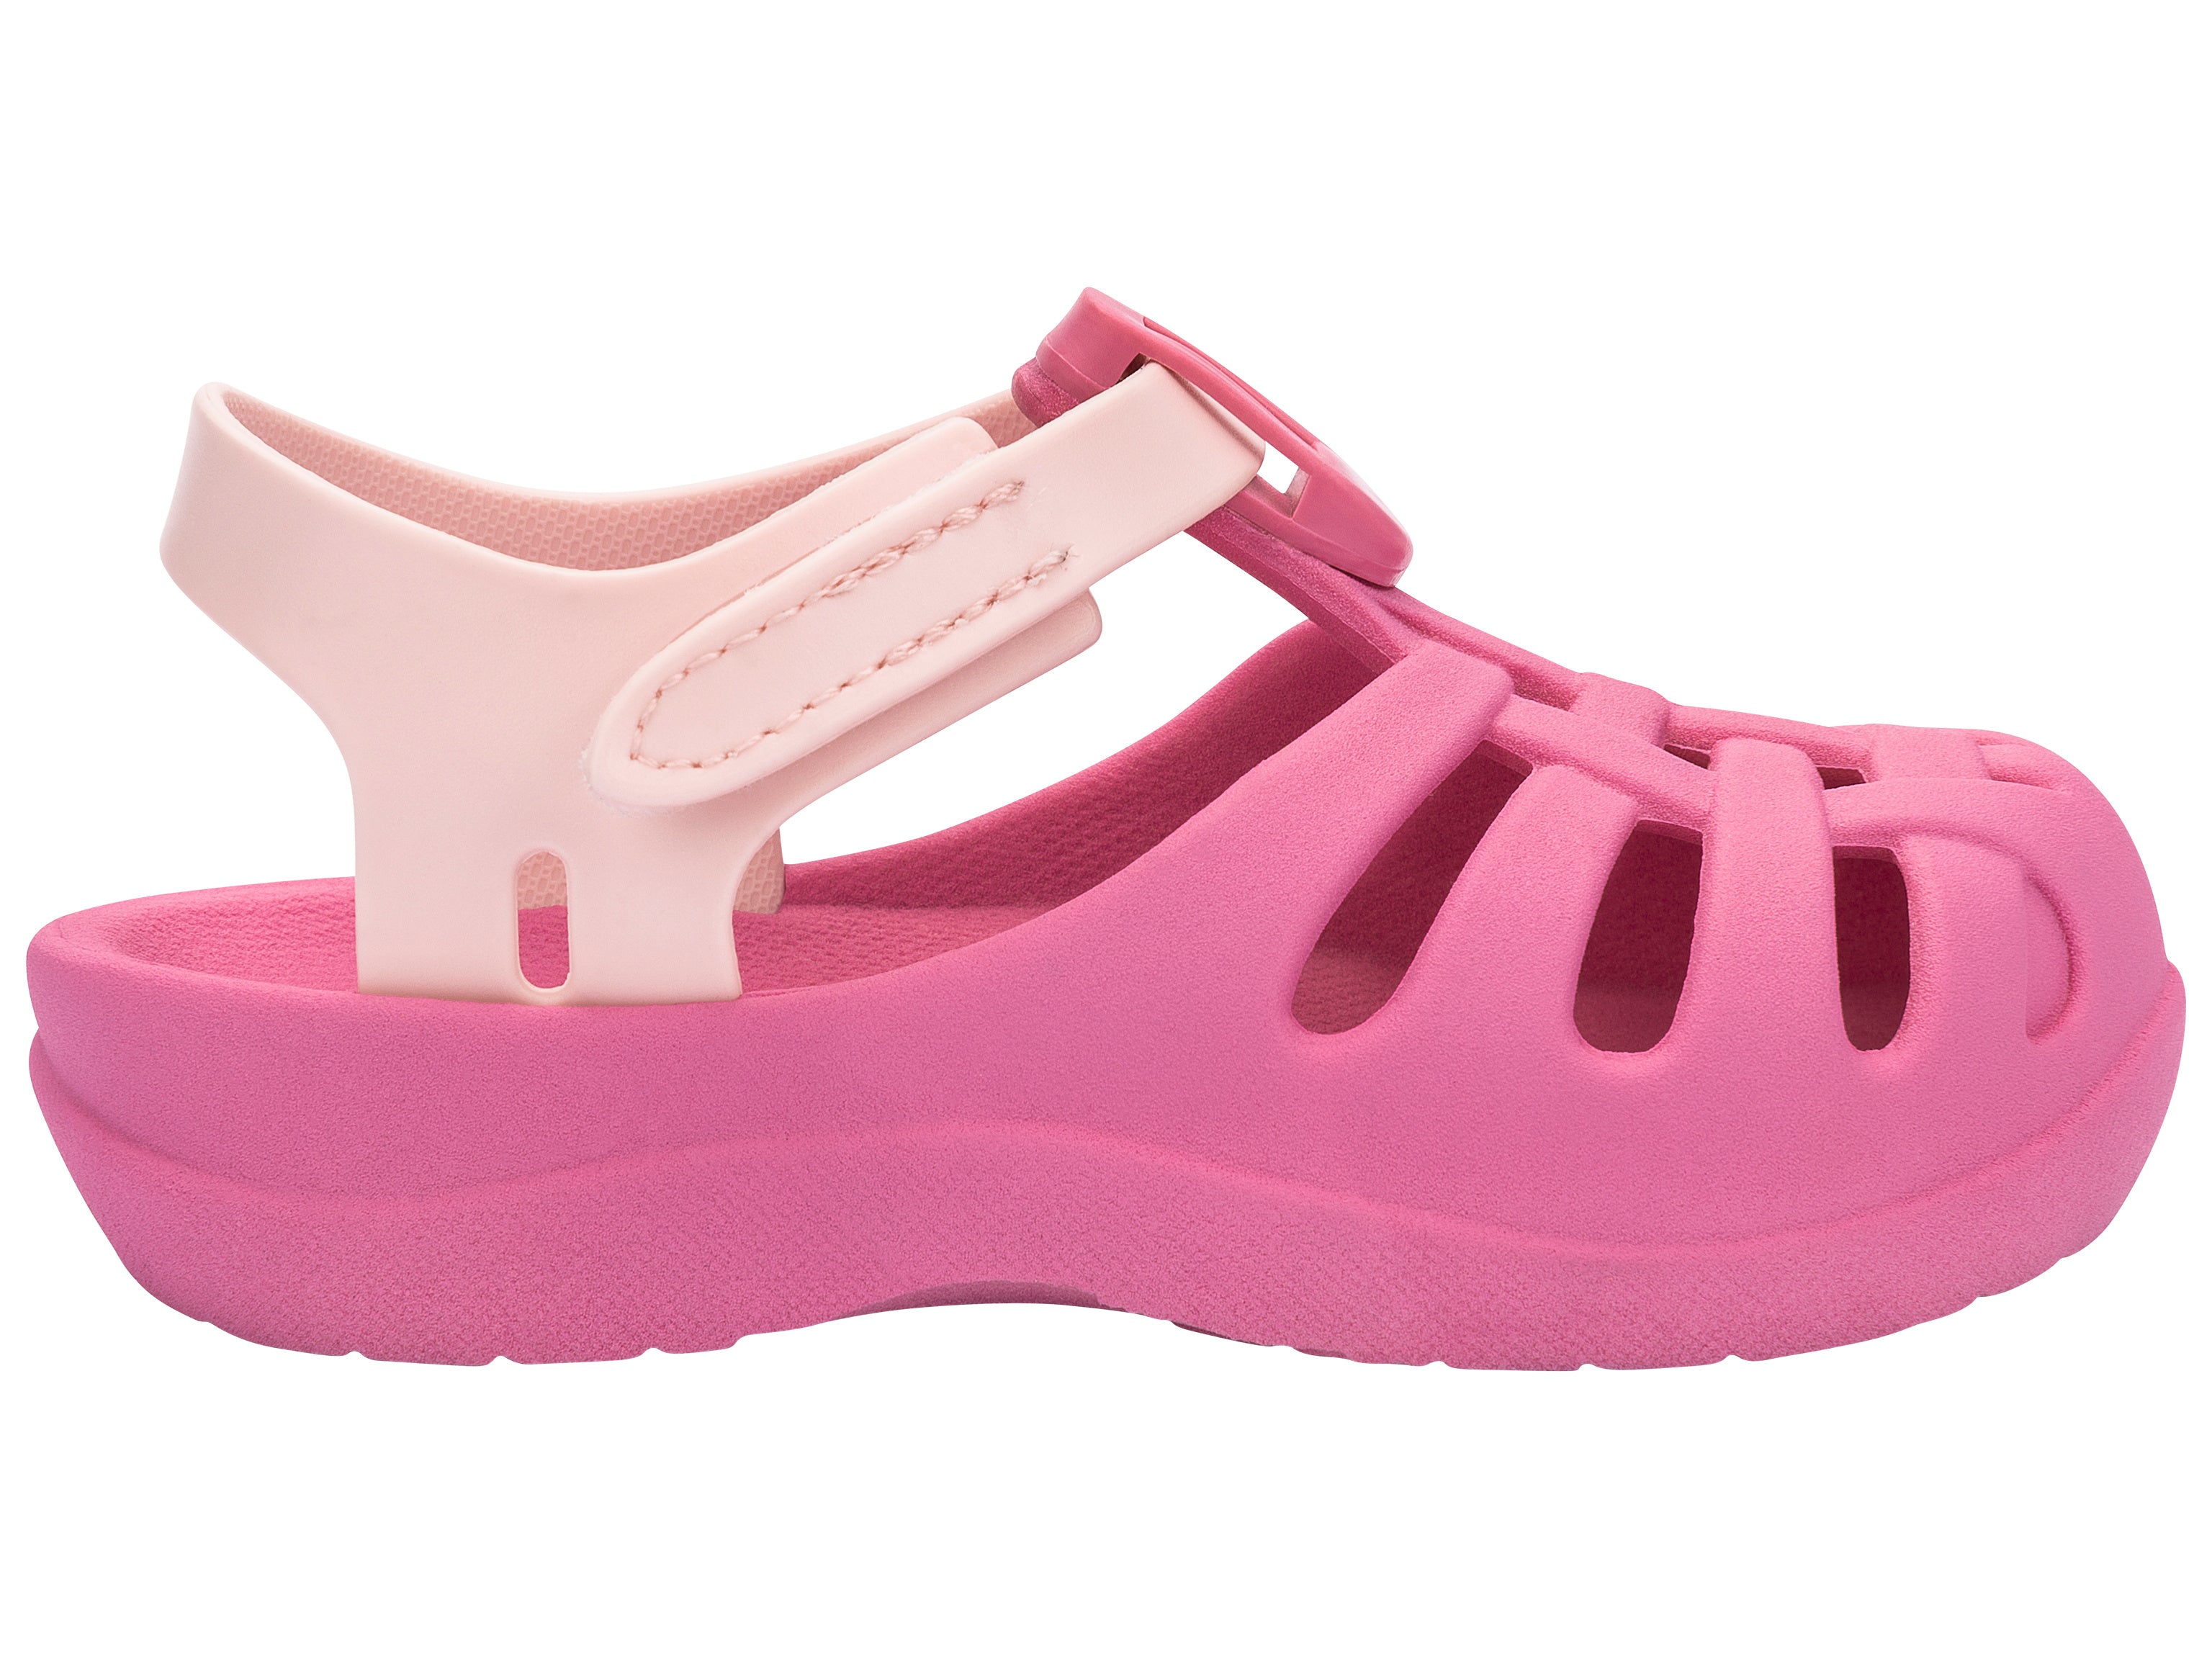 Outer side view of a pink Ipanema Summer Basic baby sandal.